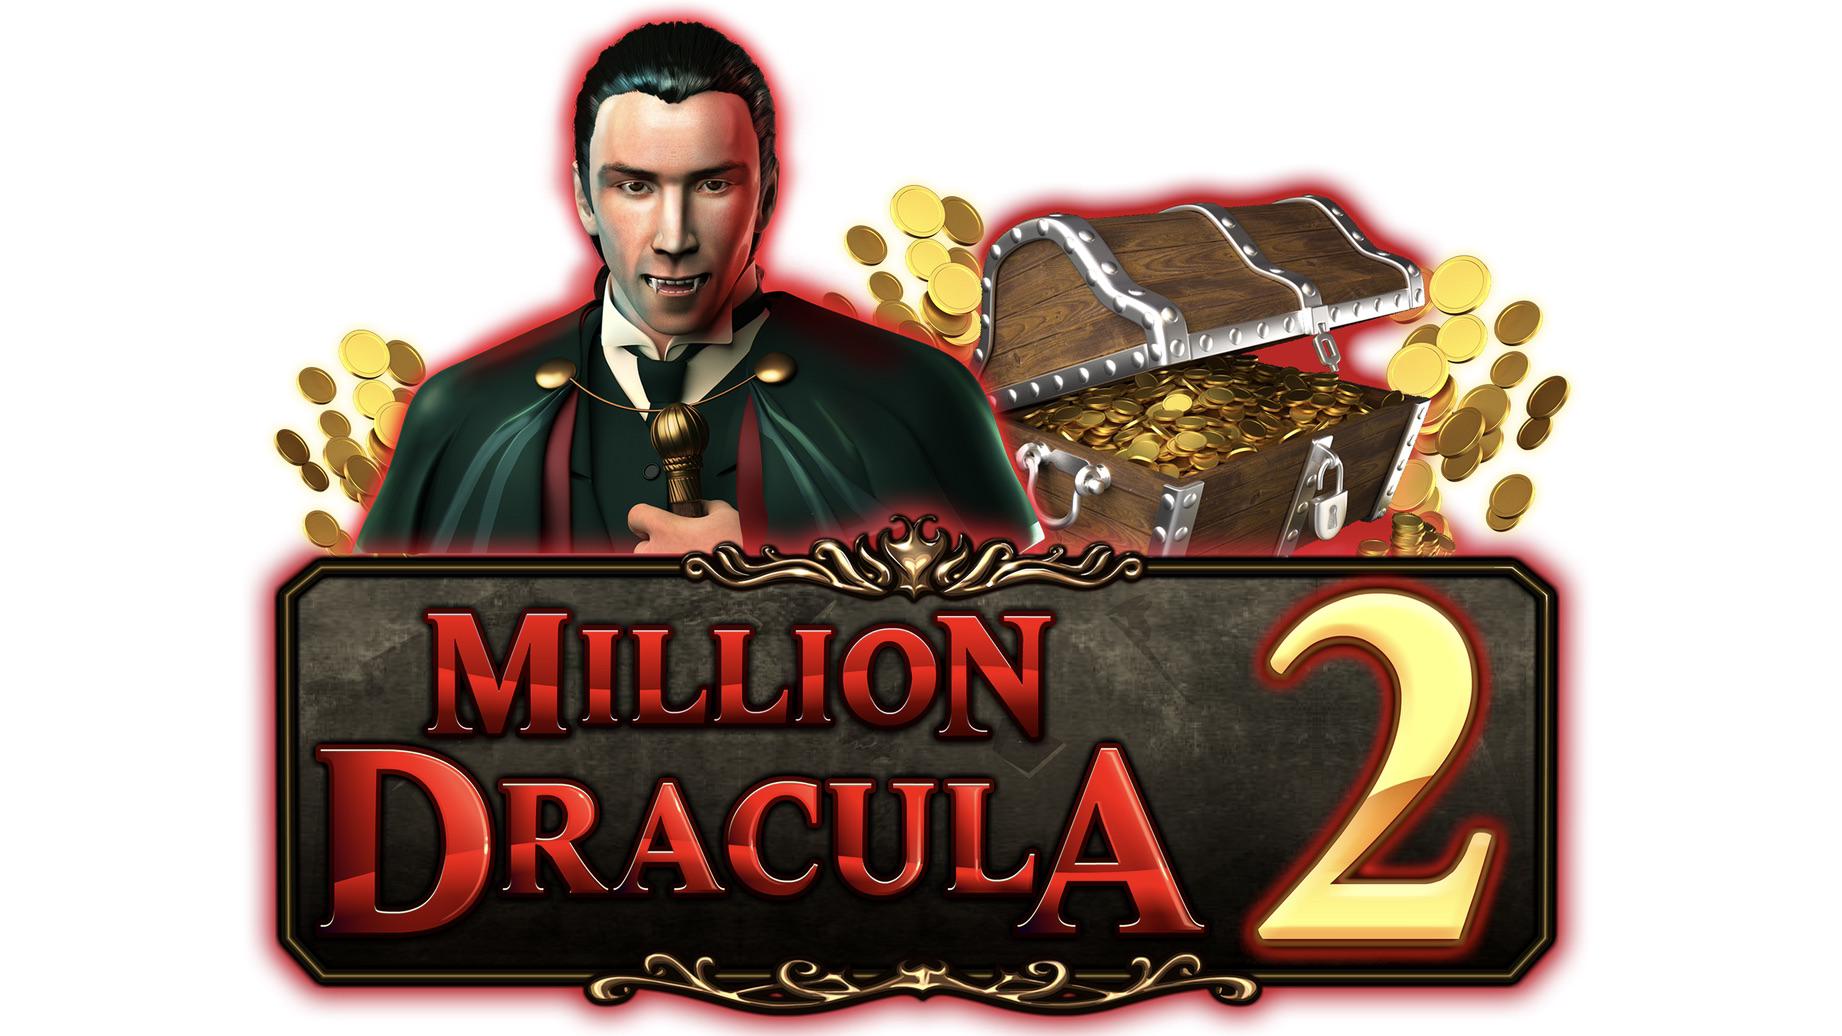 Million Dracula 2 is a 6x10, 1,000,000-payline video slot that comes with a maximum win potential of up to x10,000 the bet.